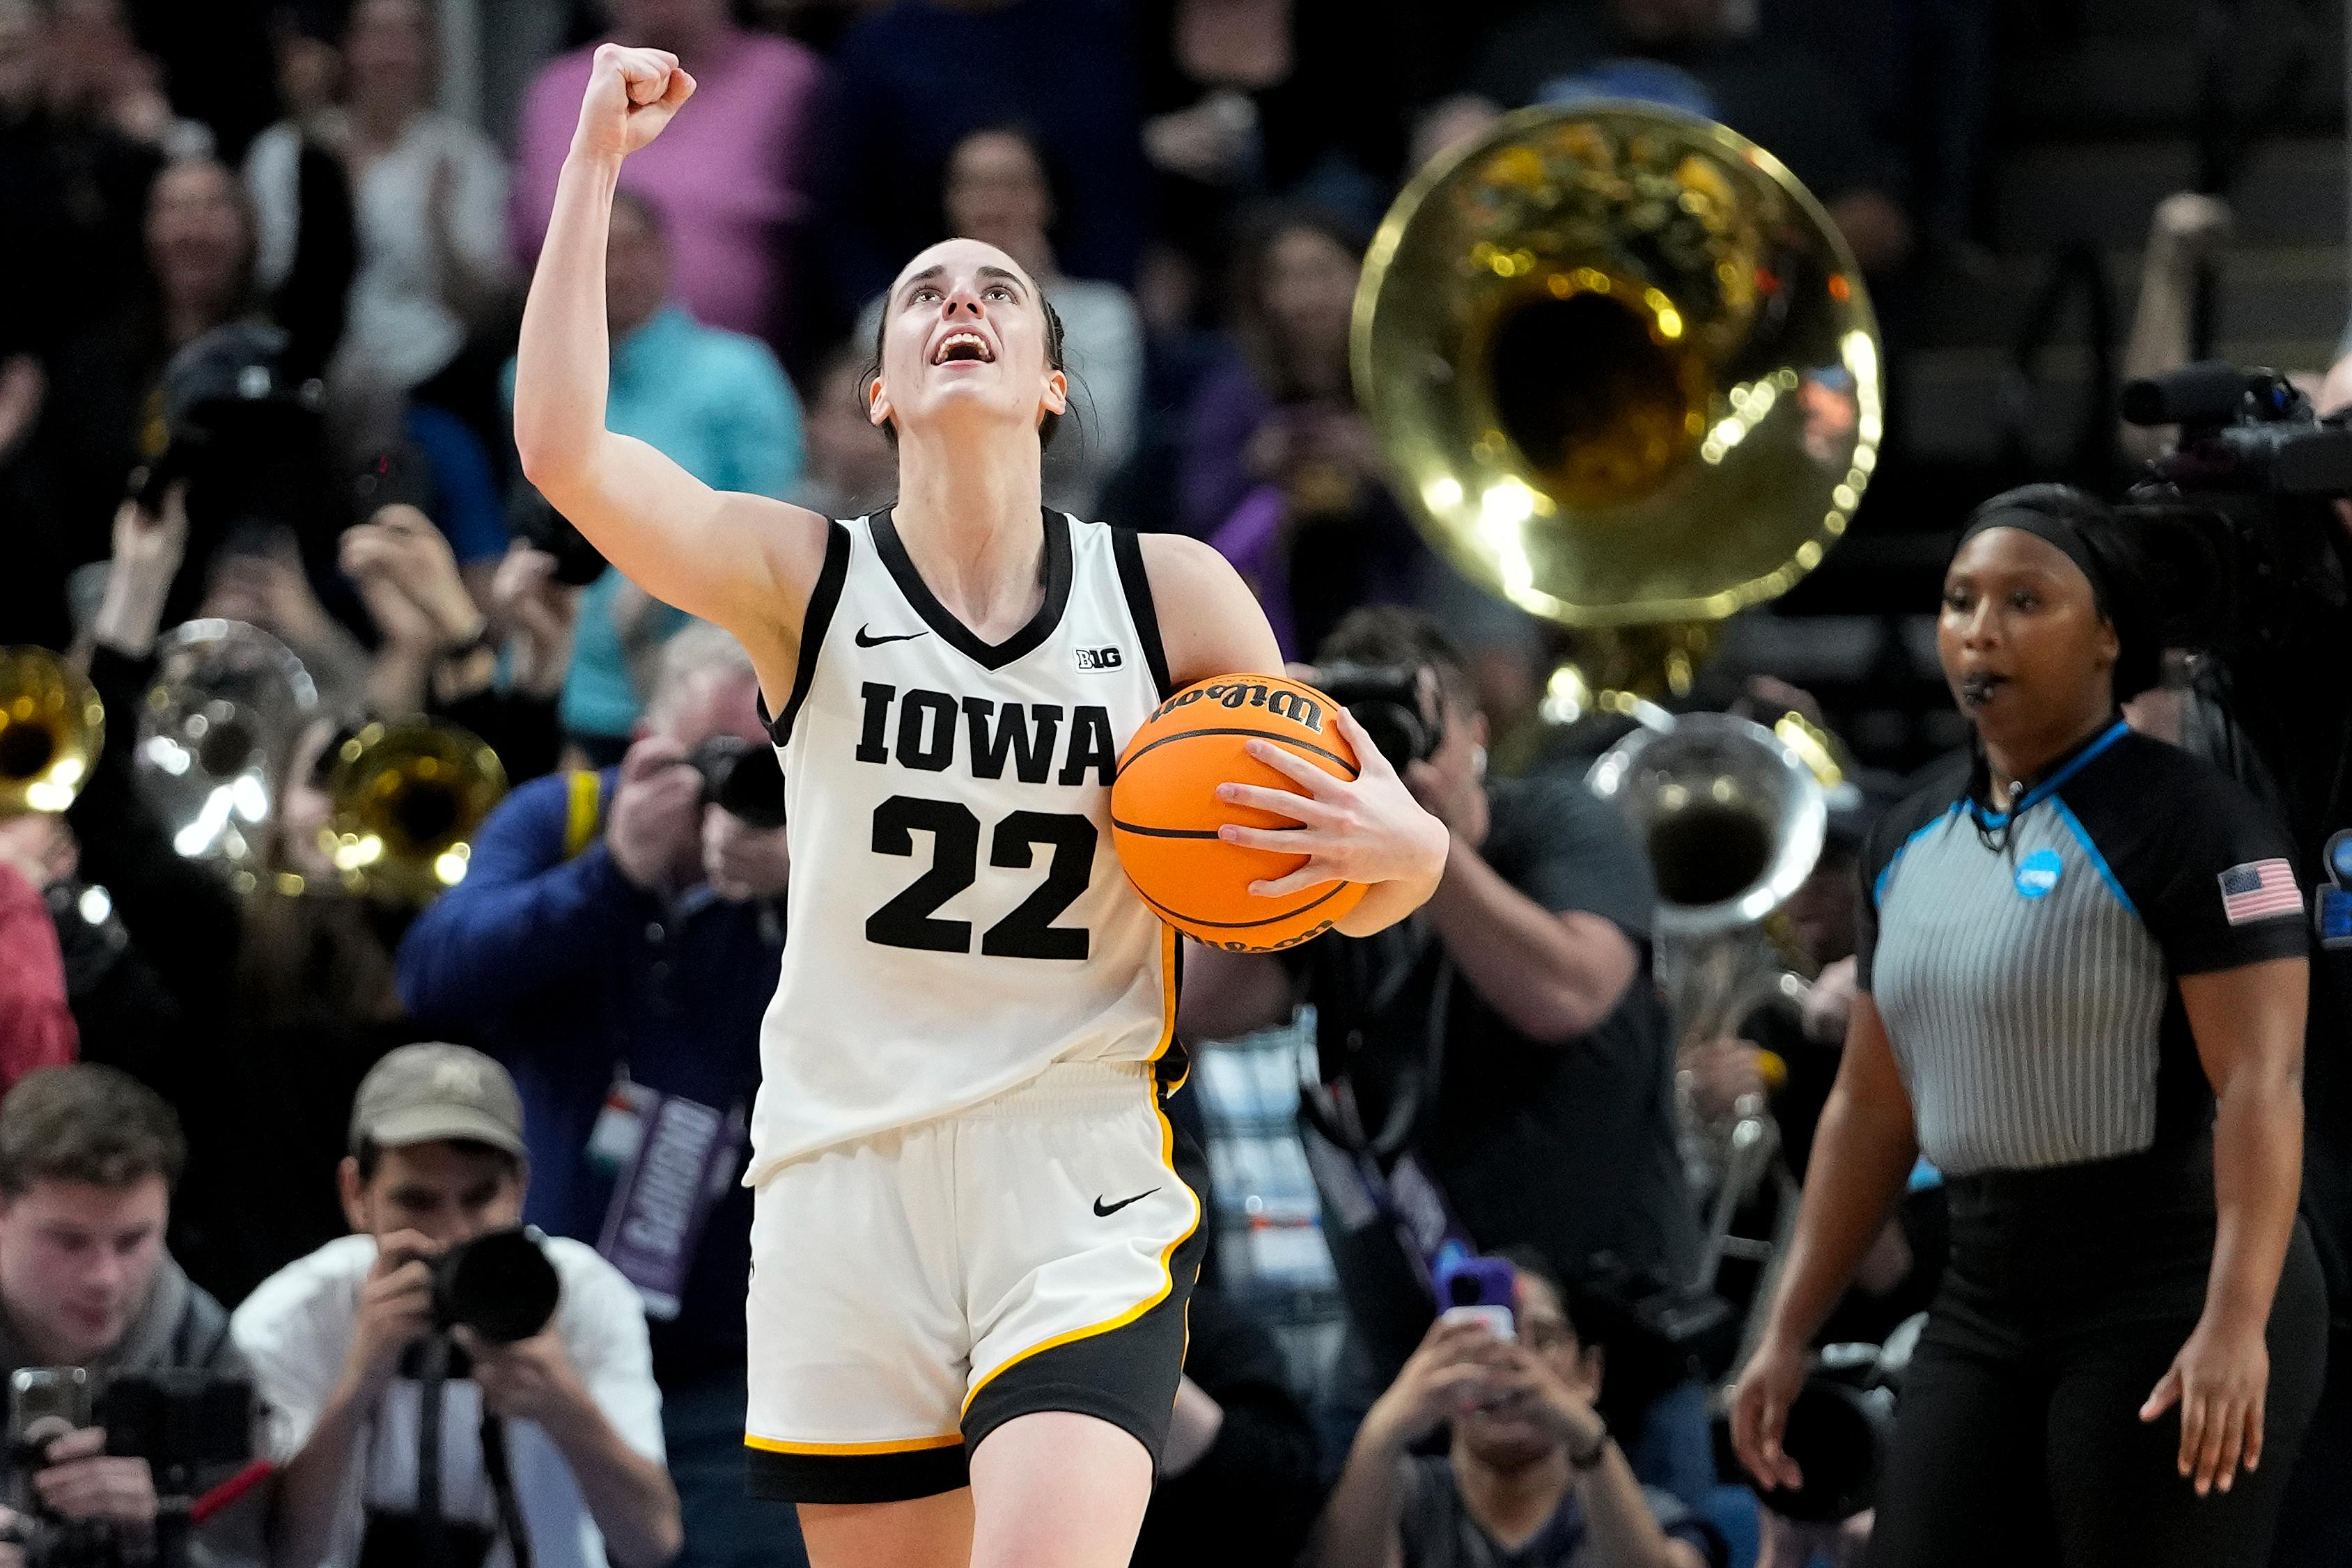 Iowa’s Victory Over LSU Was Most-Watched Women’s College Basketball Game on Record